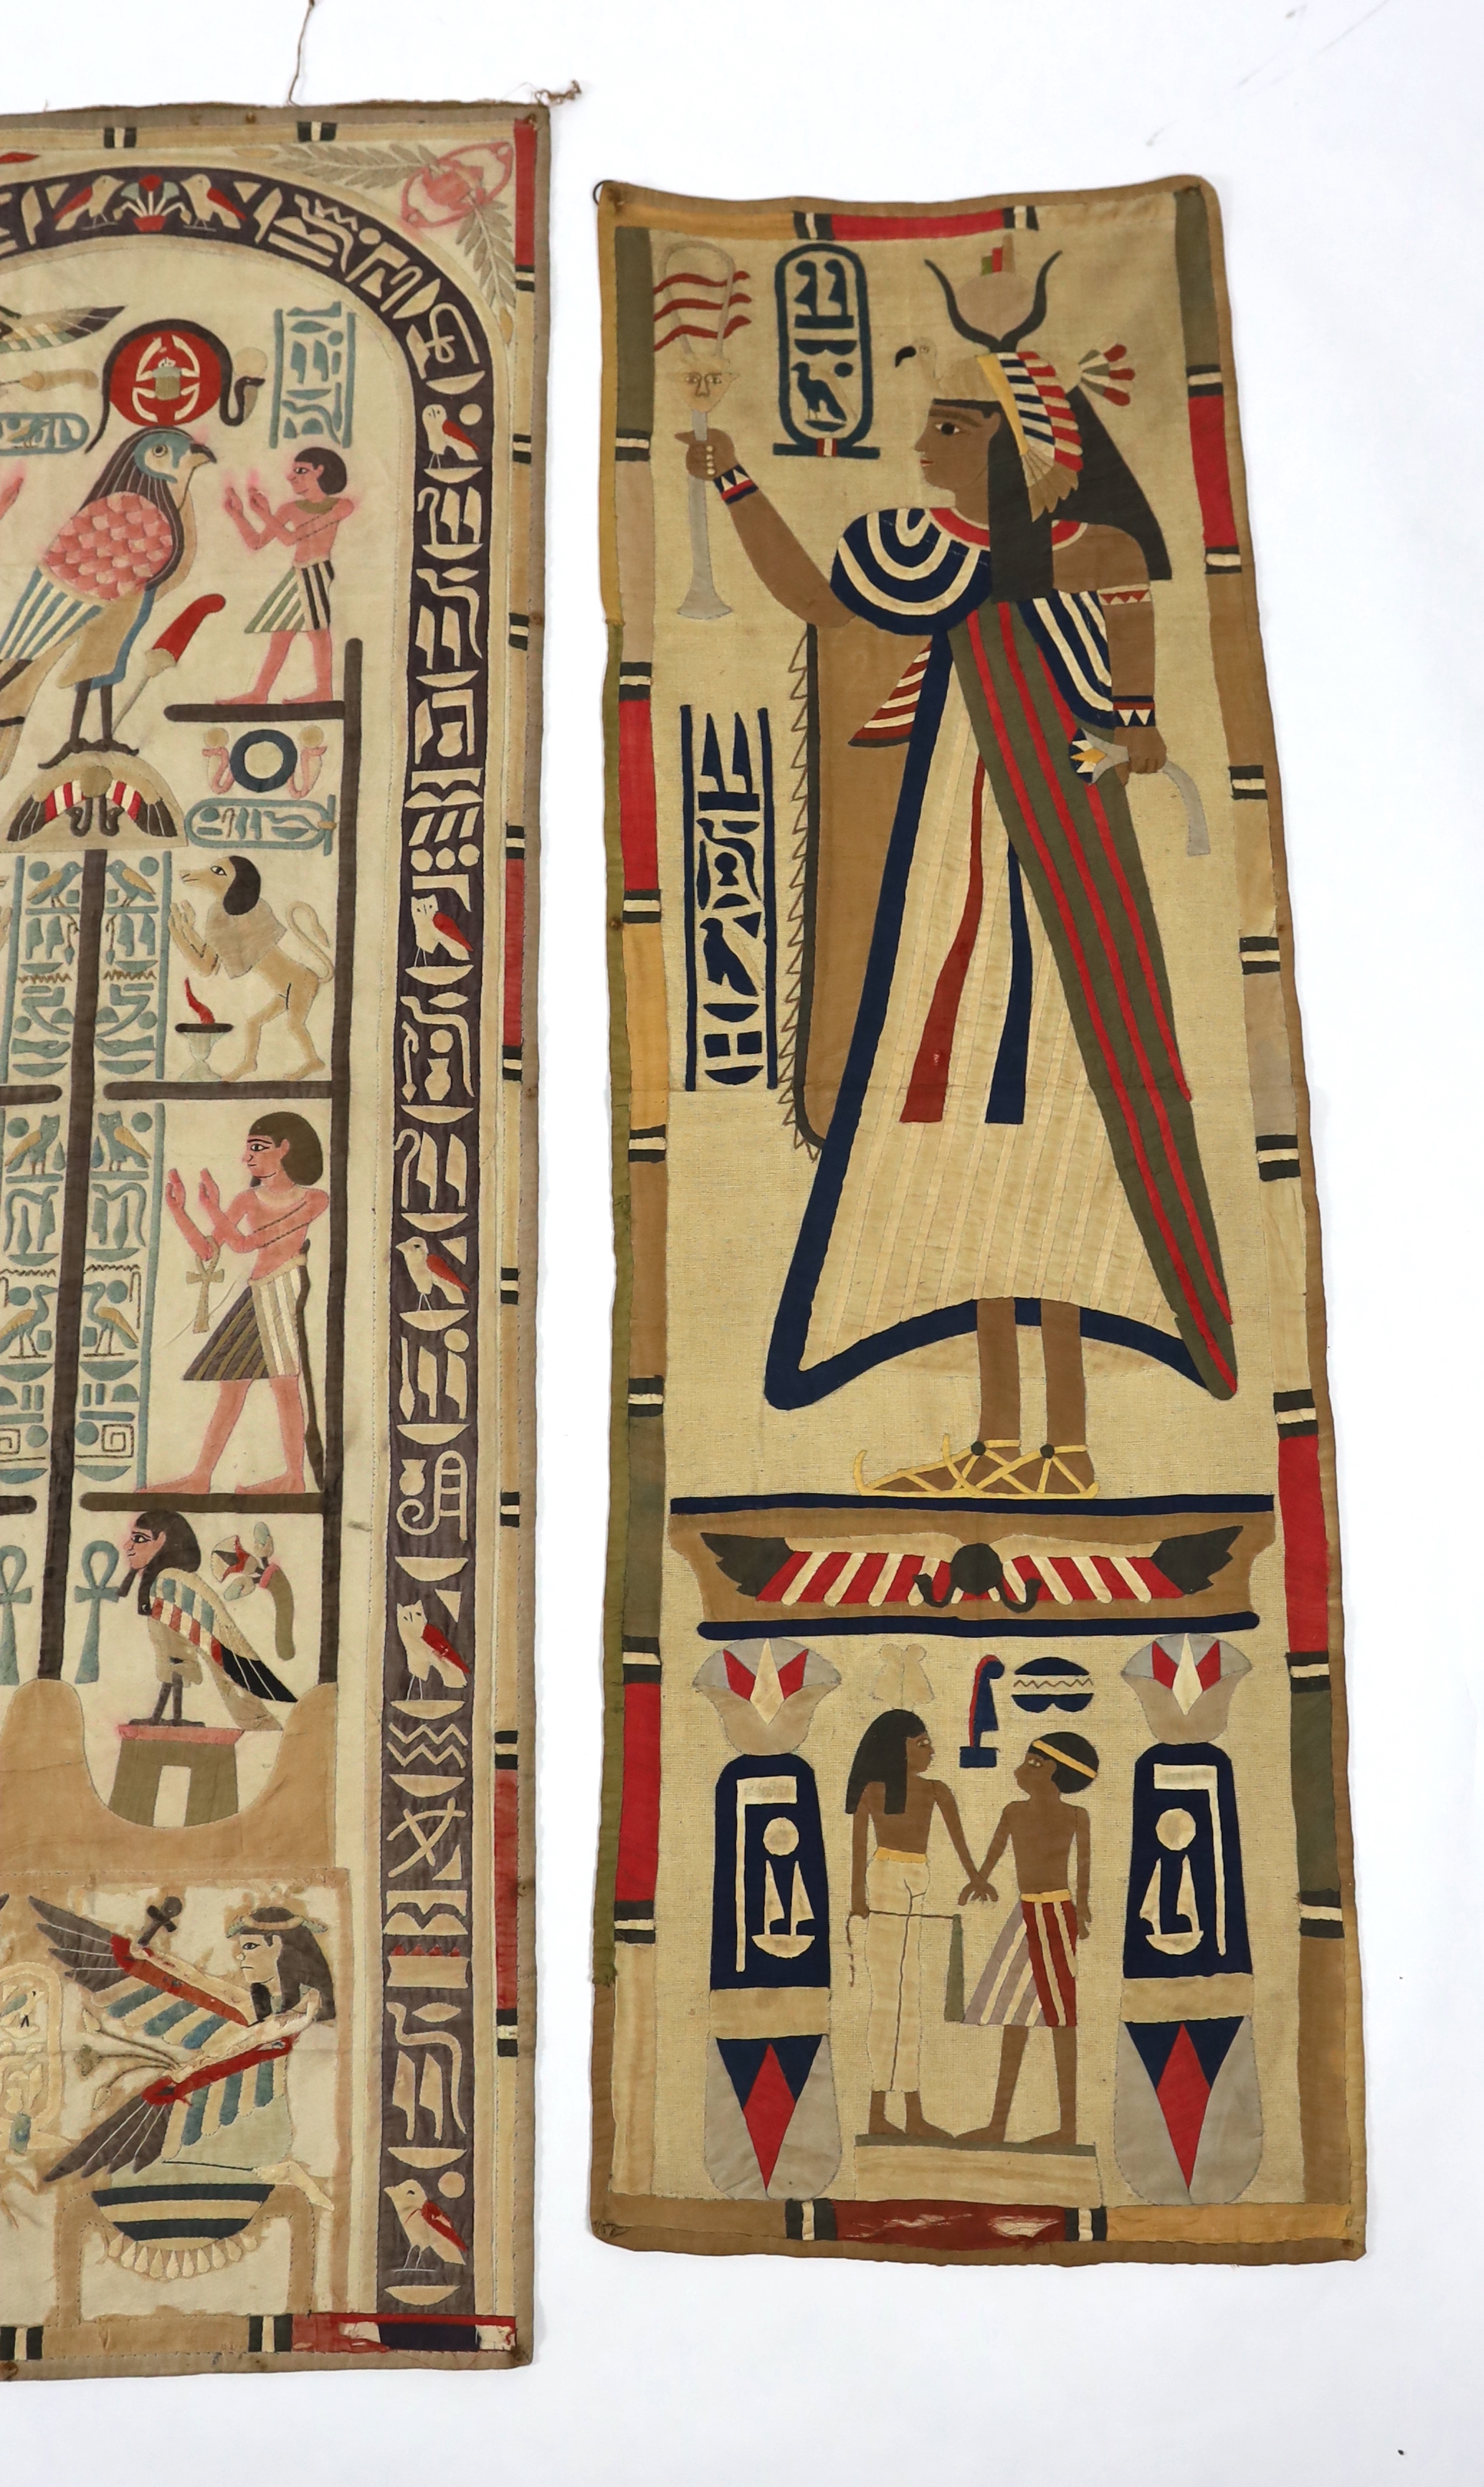 Four 1930’s Egyptian appliqué wall panels, (a pair and two single panels), decorated with various hieroglyphs, Gods and Pharaohs, the panels made for the European market experiencing an Egyptian revival after the discove